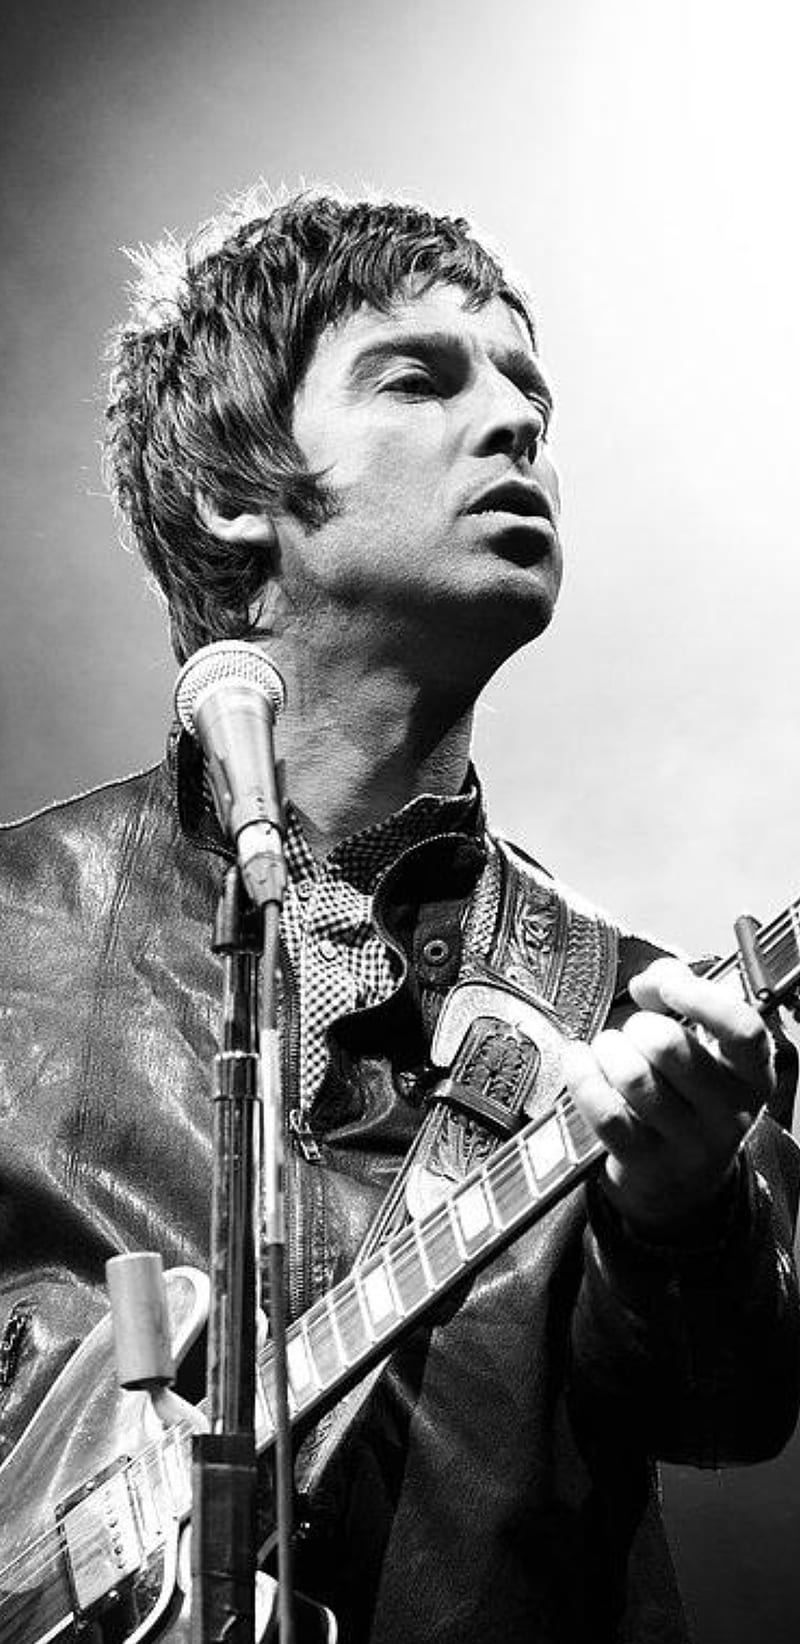 Oasis wallpaper by GrahamCoxon  Download on ZEDGE  3302